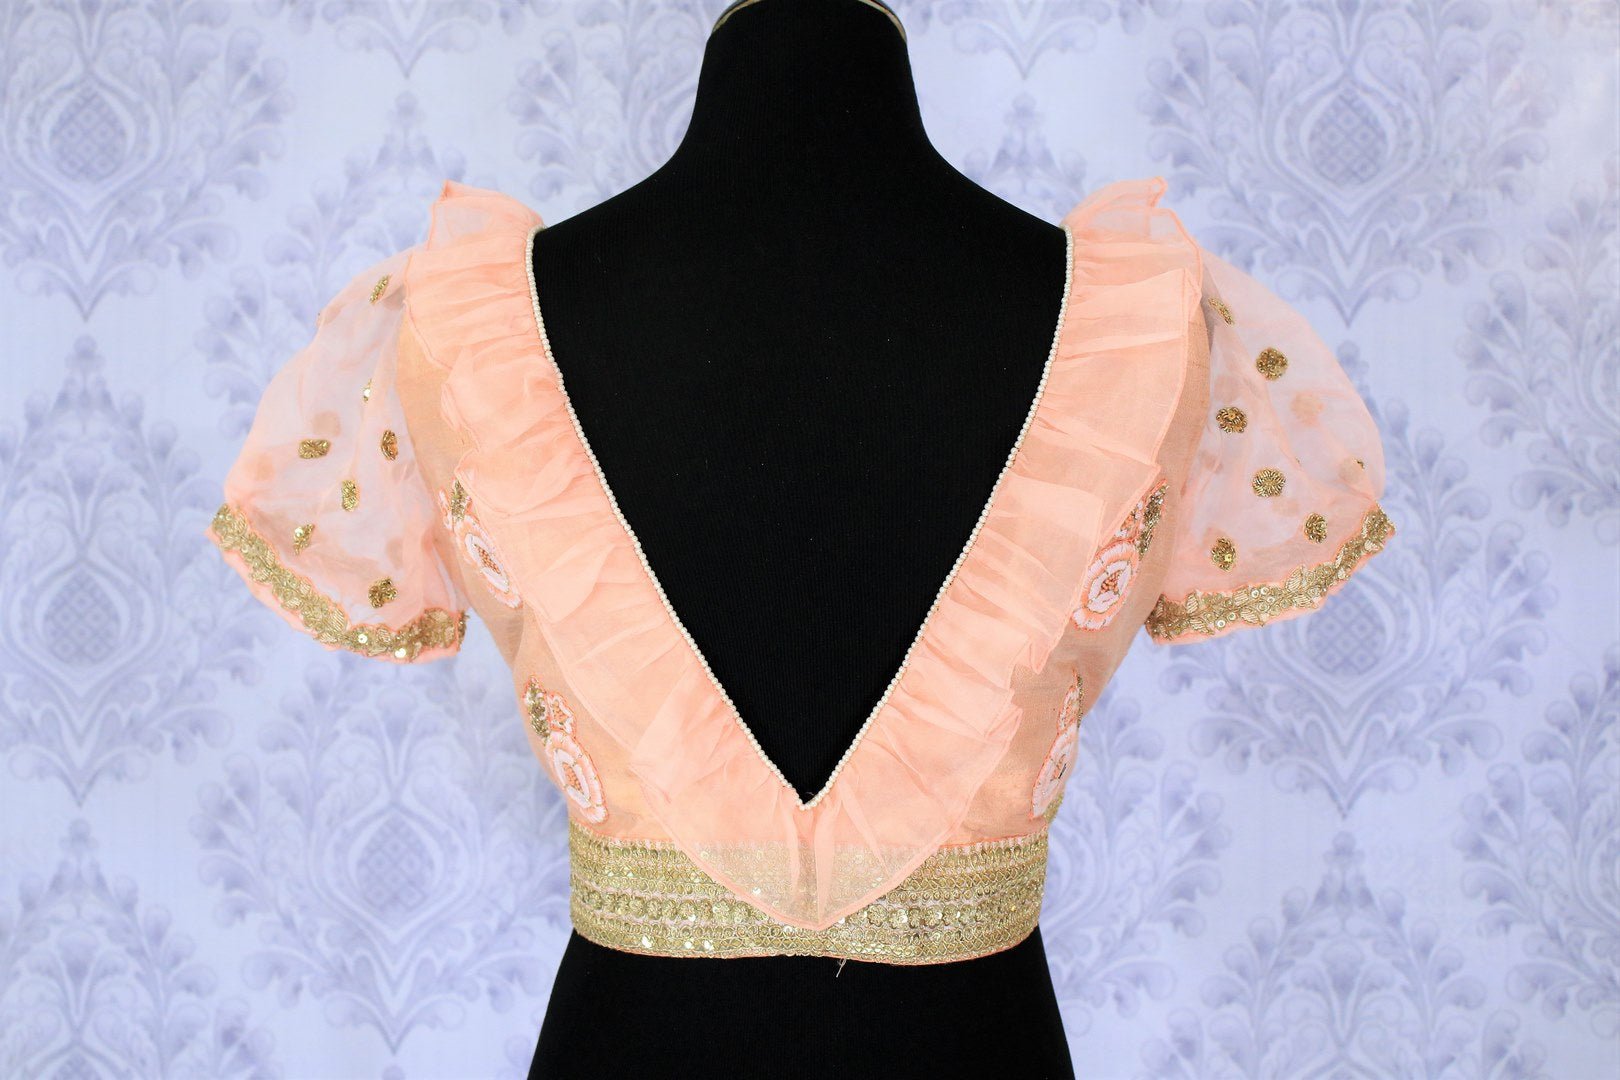 Buy peach embroidered designer sari blouse online in USA. Find matching designer saree blouses for your beautiful Indian sarees in USA at Pure Elegance exclusive clothing store or shop online.-back